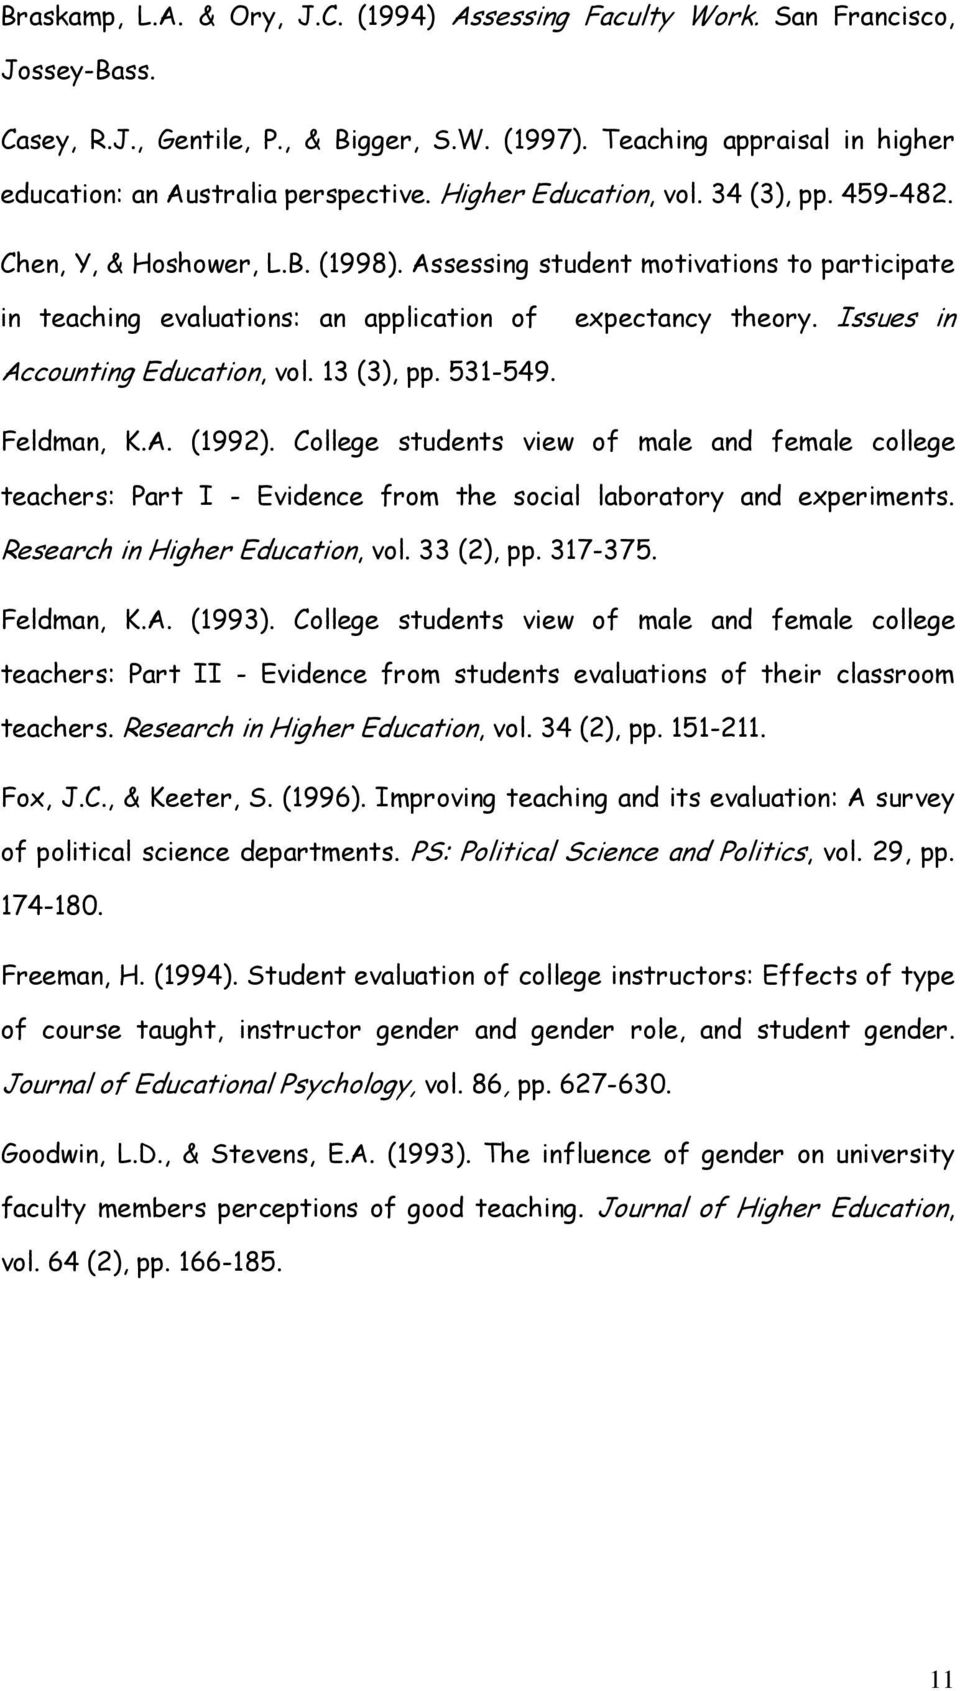 Issues in Accounting Education, vol. 13 (3), pp. 531-549. Feldman, K.A. (1992). College students view of male and female college teachers: Part I - Evidence from the social laboratory and experiments.